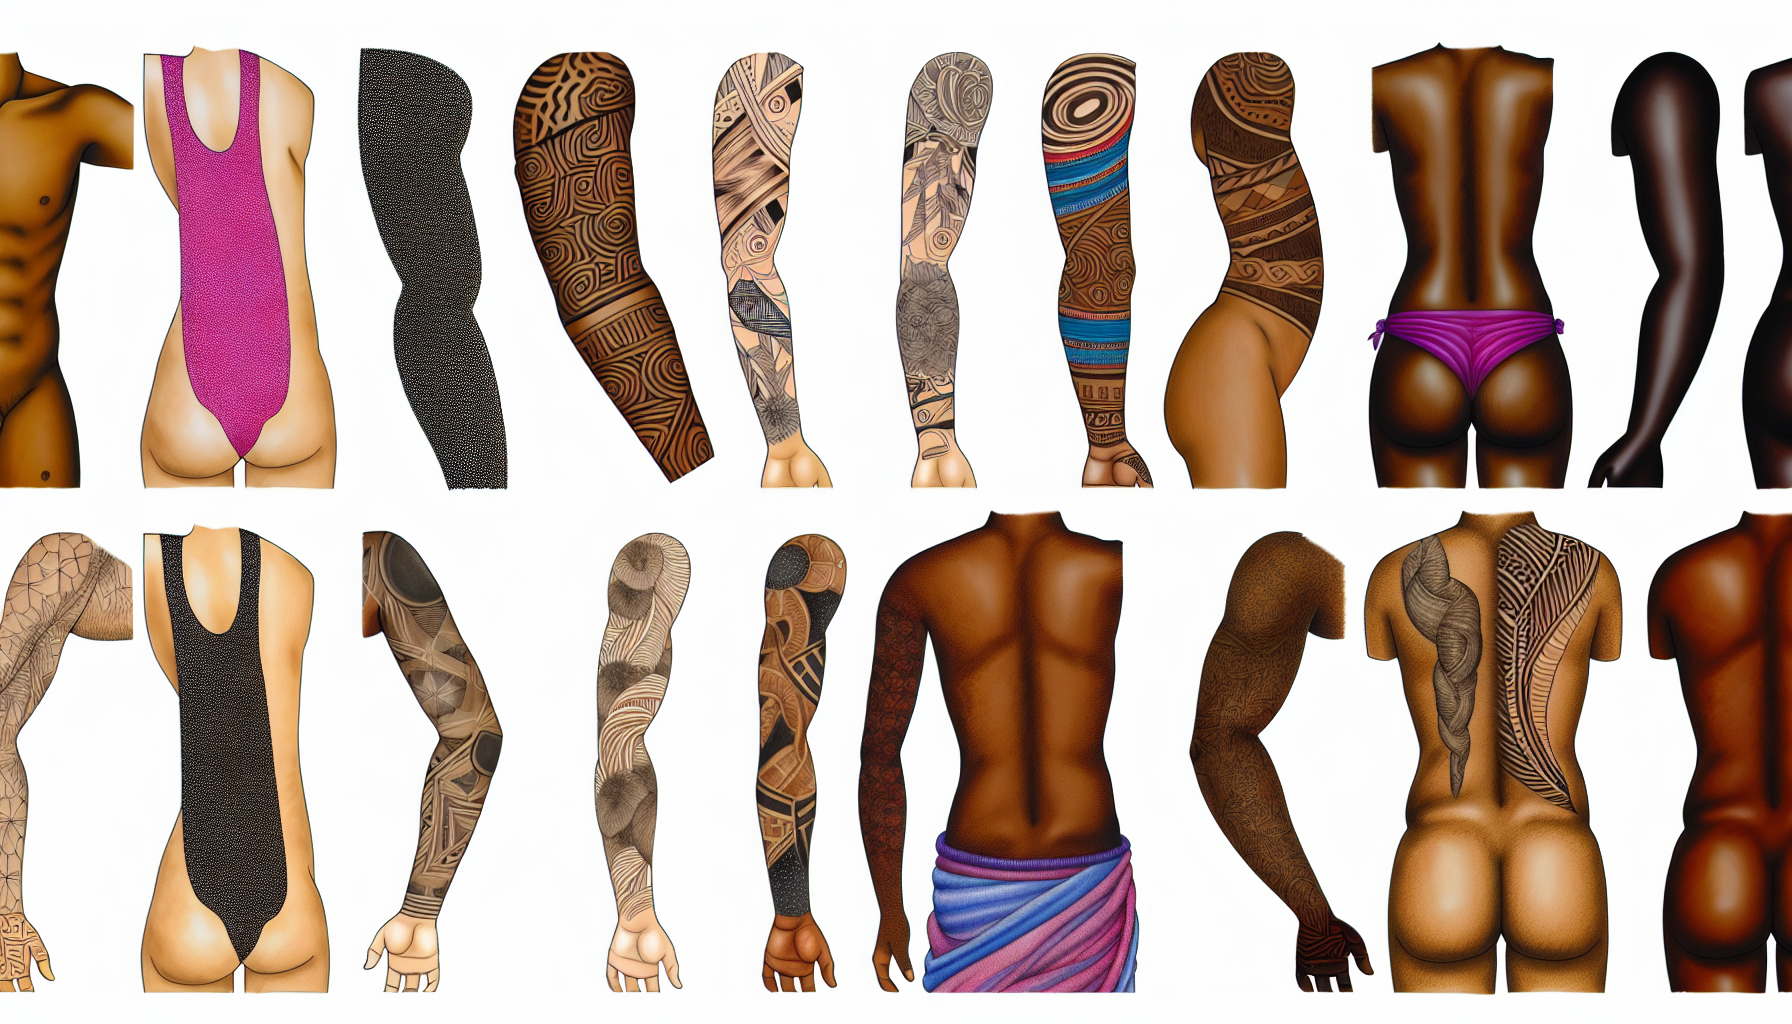 Selecting ideal body part for a tattoo